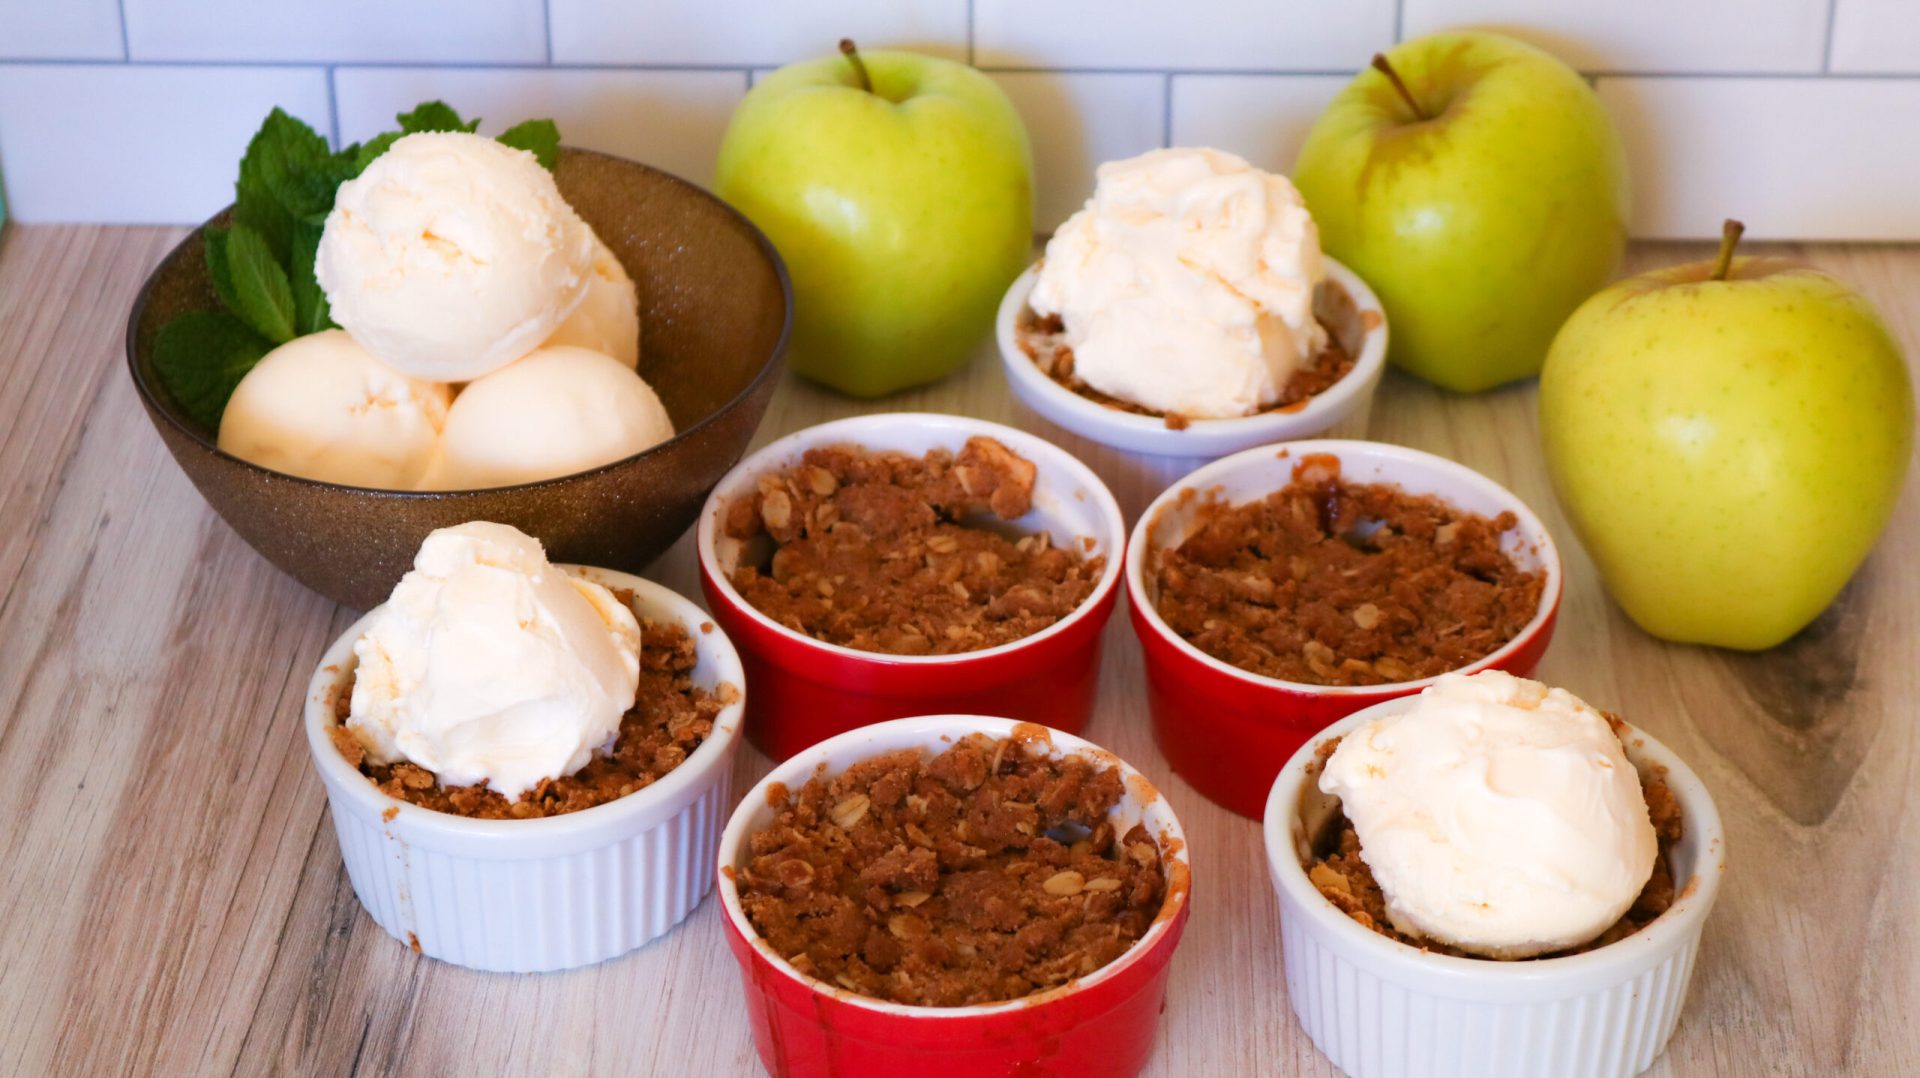 A table topped with bowls of apple cobbler.